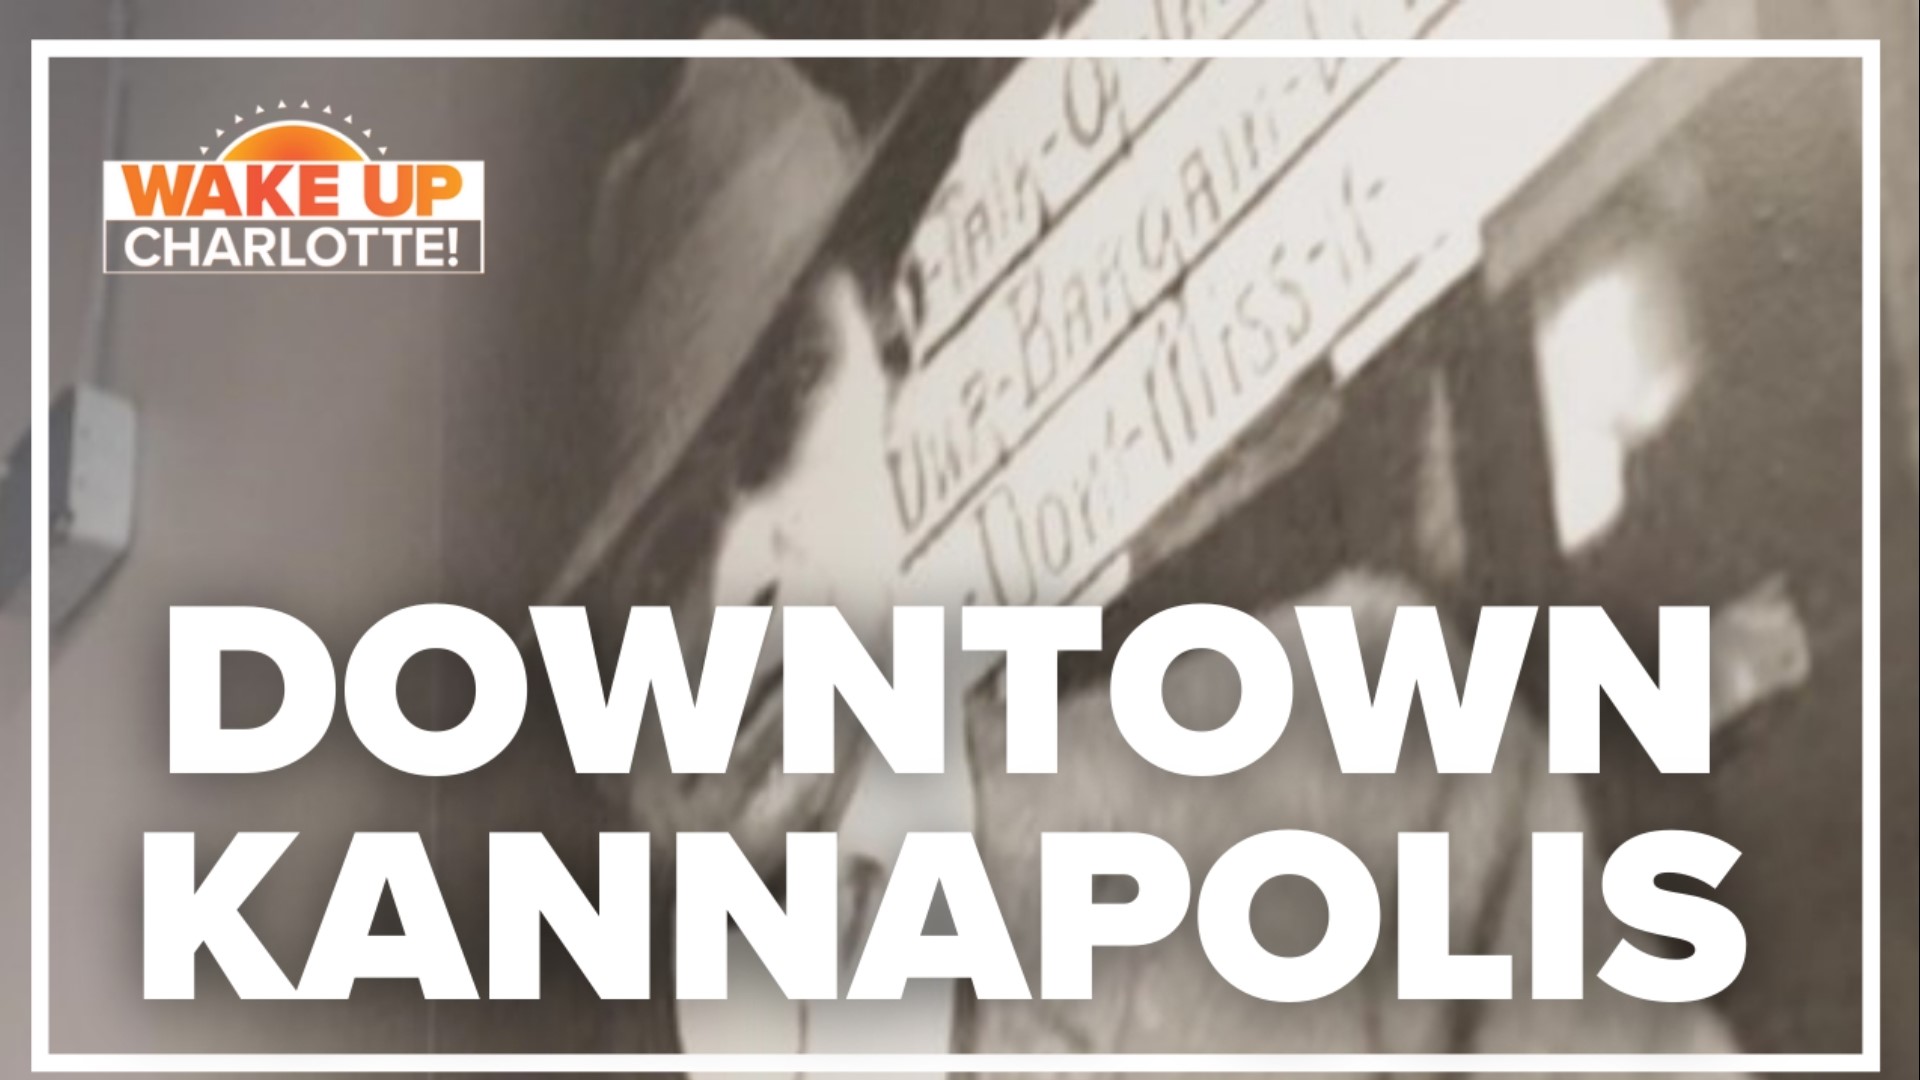 A few weeks ago, our Richard Devayne showed us the major changes Kannapolis has gone through over the years.